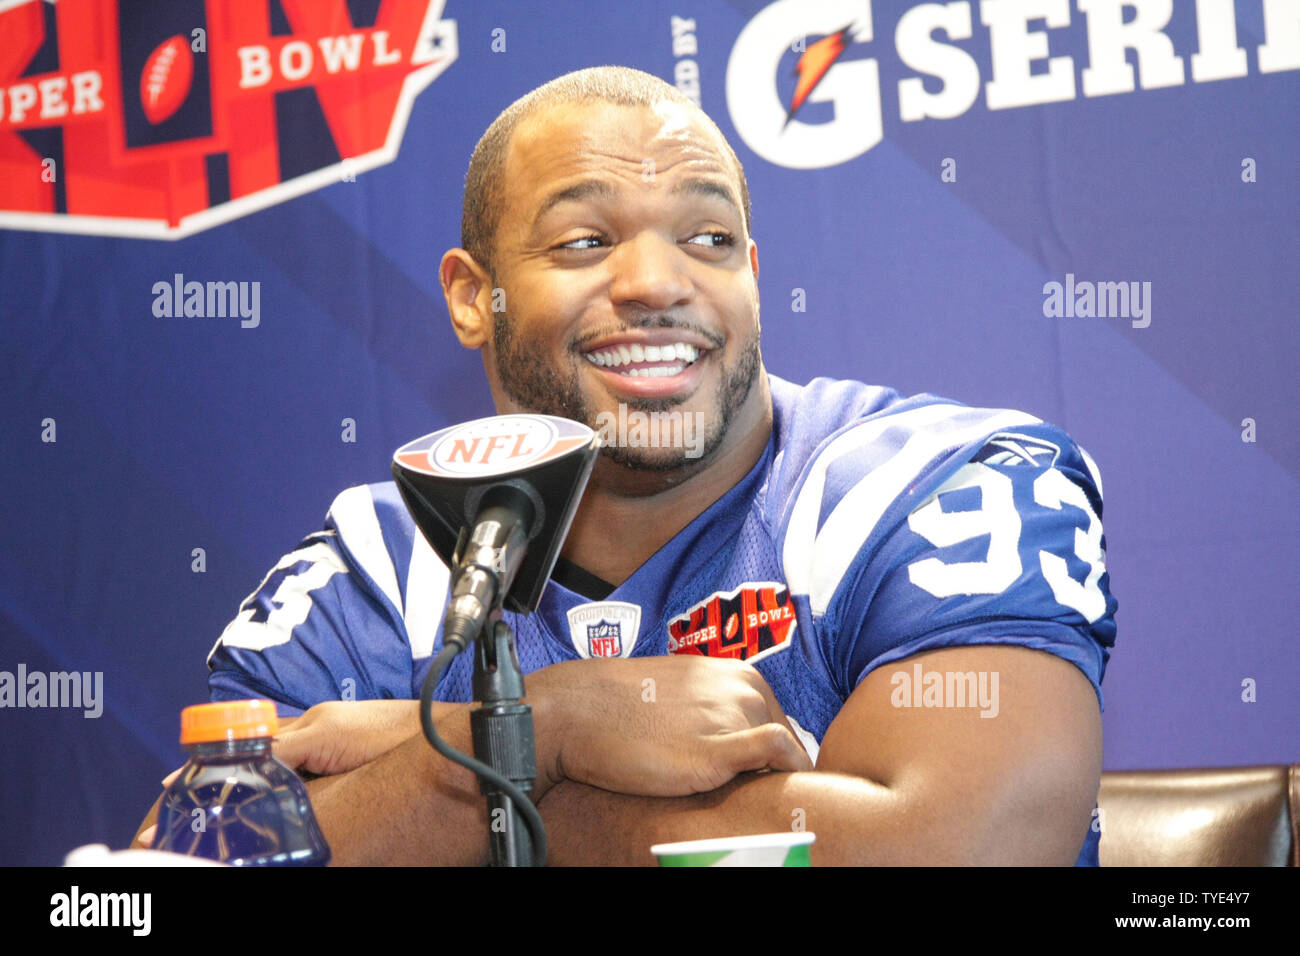 Indianapolis Colts defensive end Dwight Freeney attends Media Day at Sun Life Stadium, in Miami on February 2, 2010. Freeney sprained his ankle last week in the AFC Championship game and may not play in Super Bowl XLIV. Super Bowl XLIV will feature the Indianapolis Colts and New Orleans Saints on Sunday, February 7. UPI/Susan Knowles Stock Photo